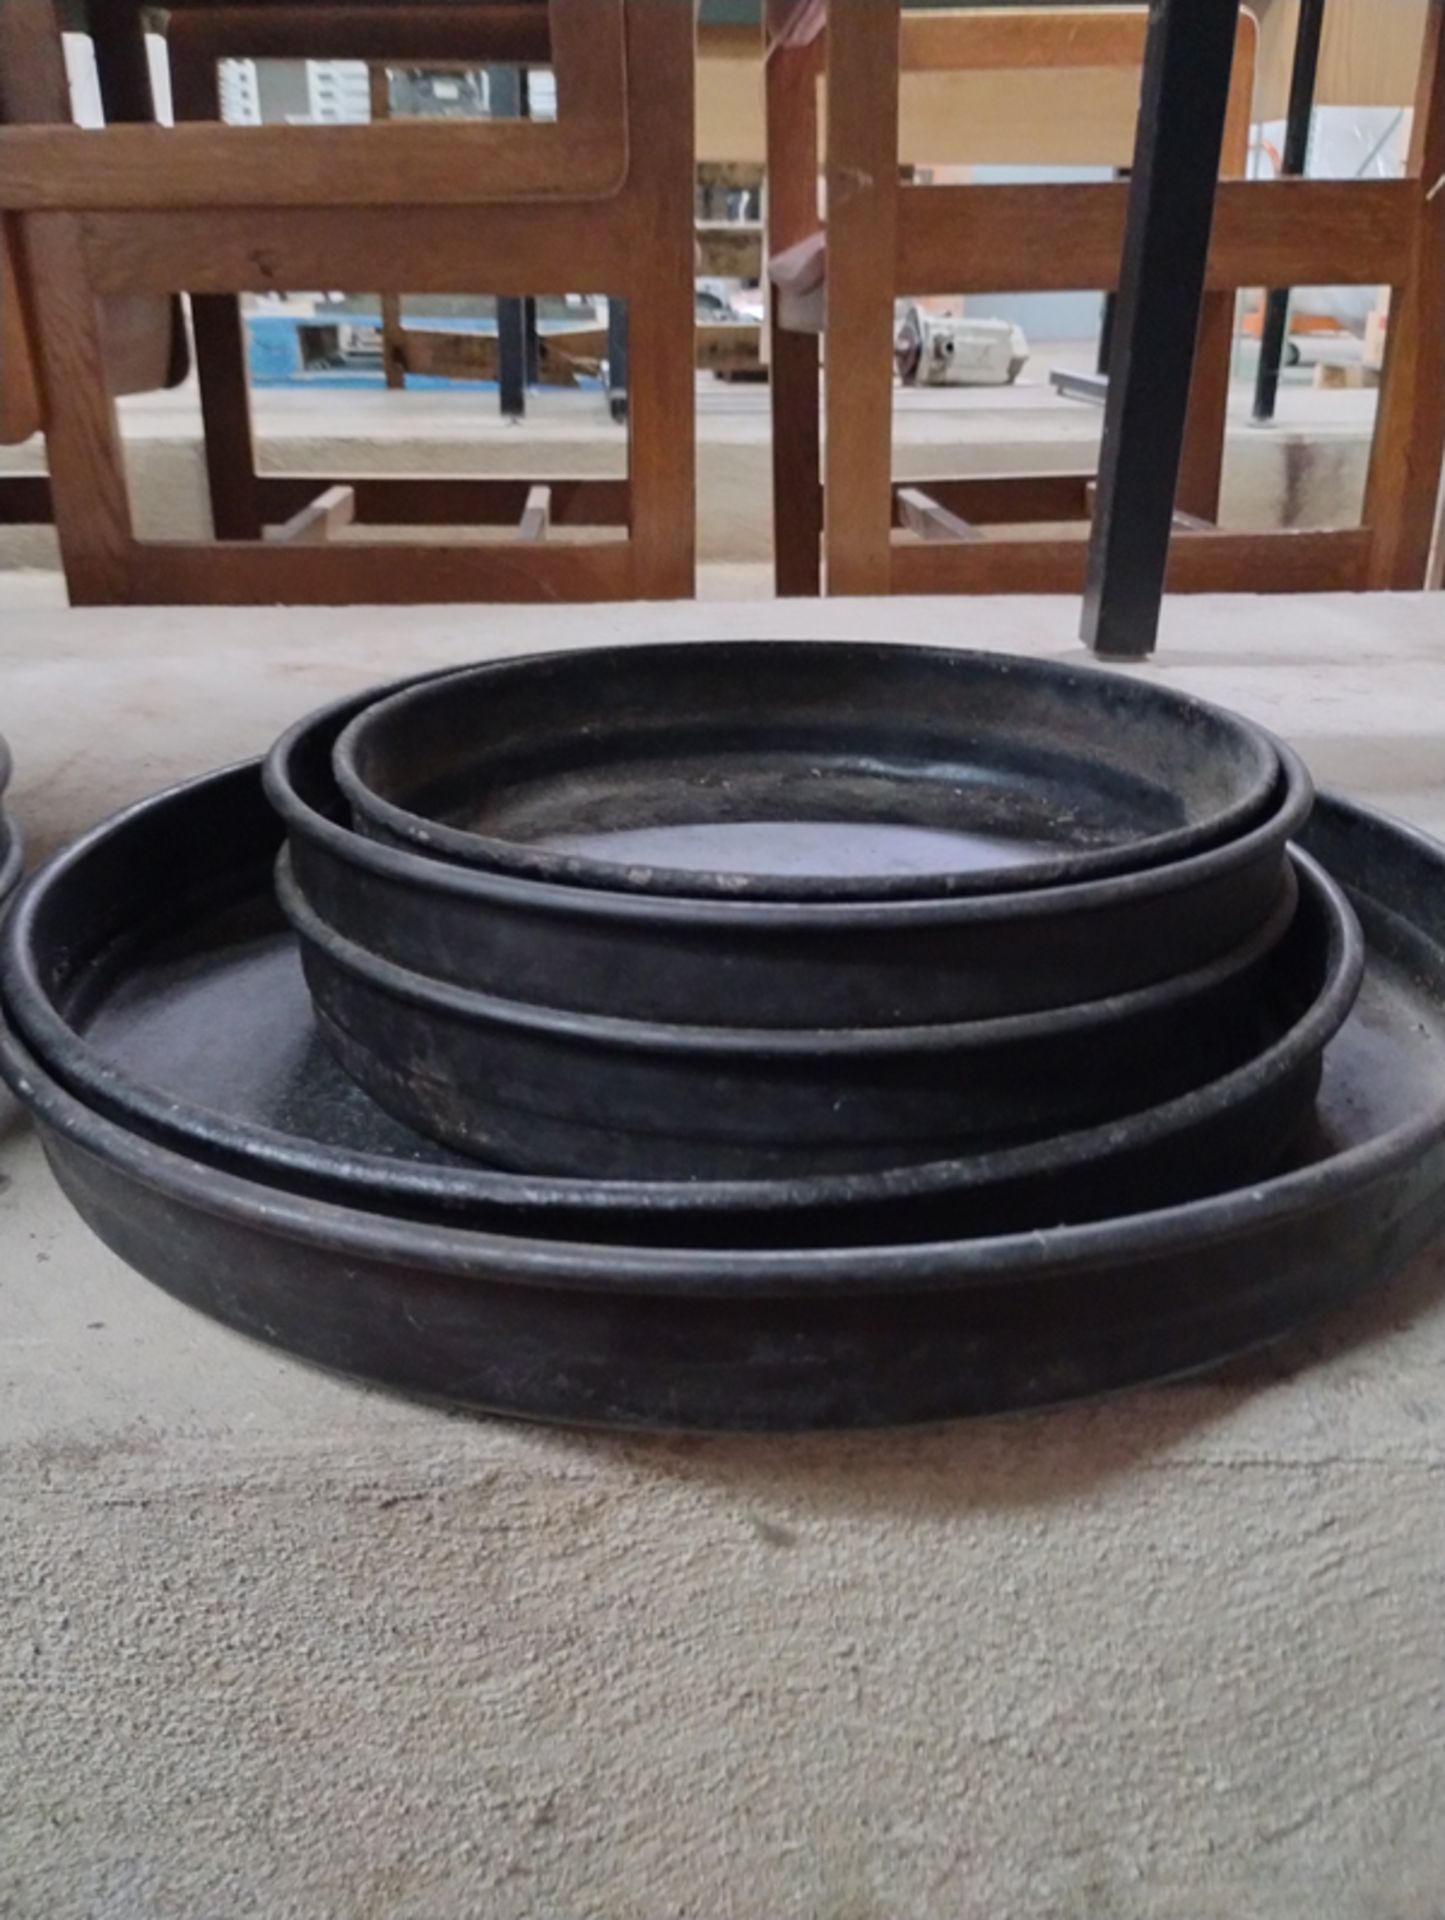 14 ASSORTED SIZES ROUND PANS 10" - 16" - Image 3 of 7